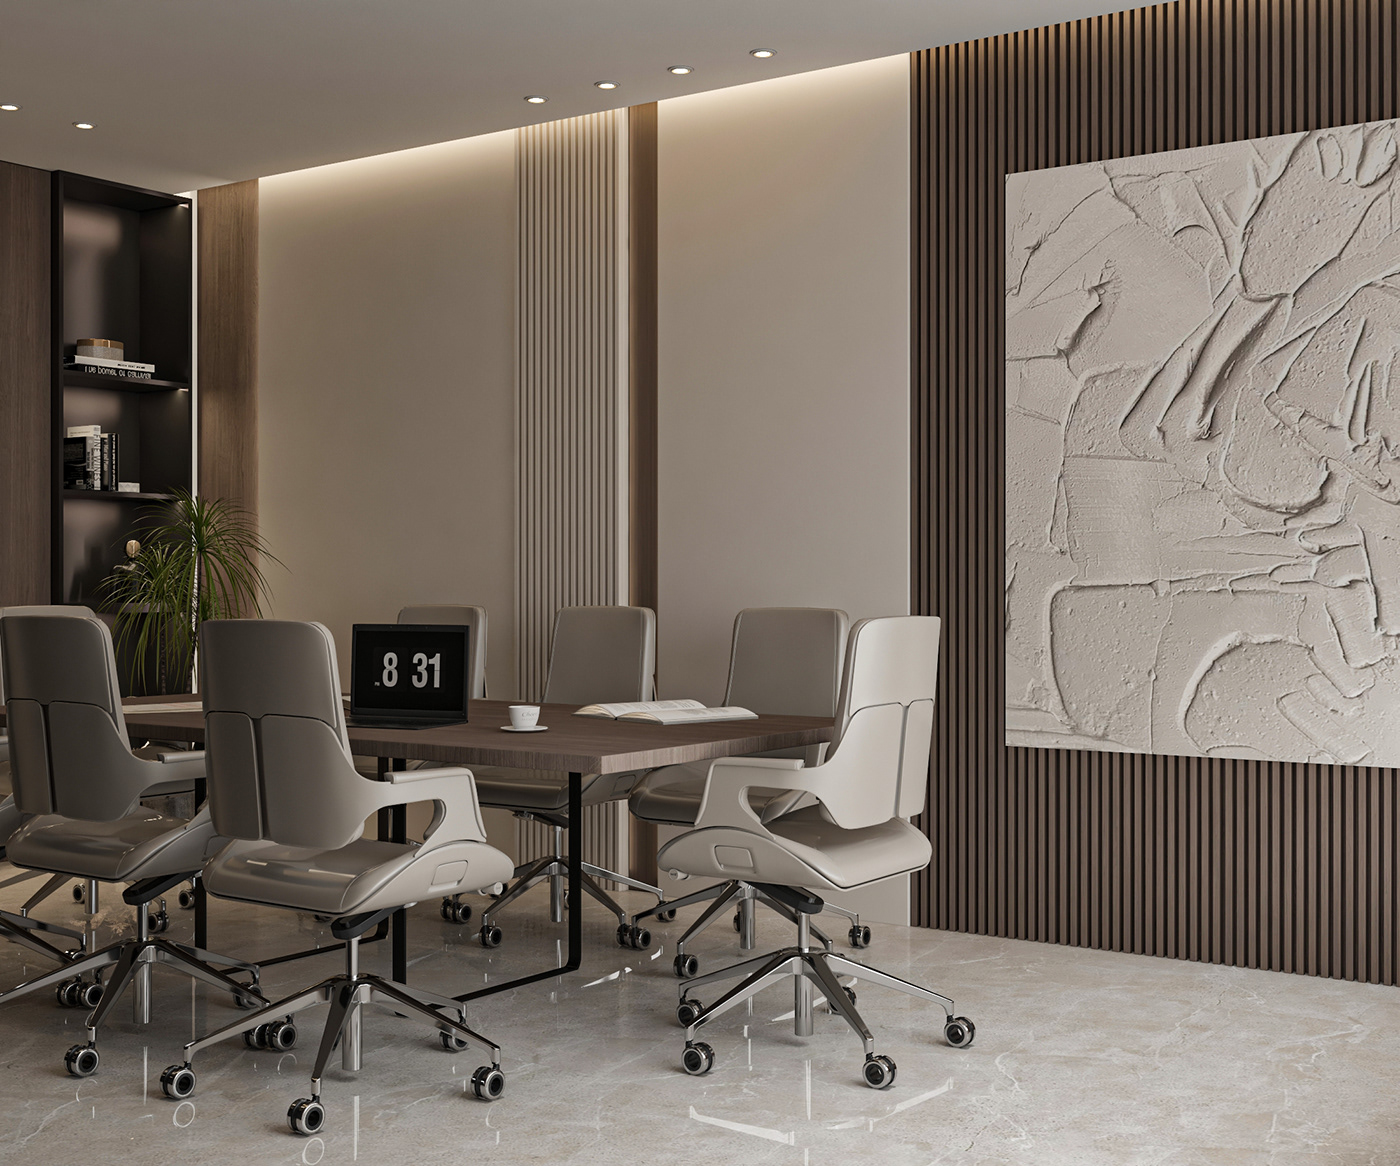 3dvisualization business company conference library luxurious meeting modern Office Render